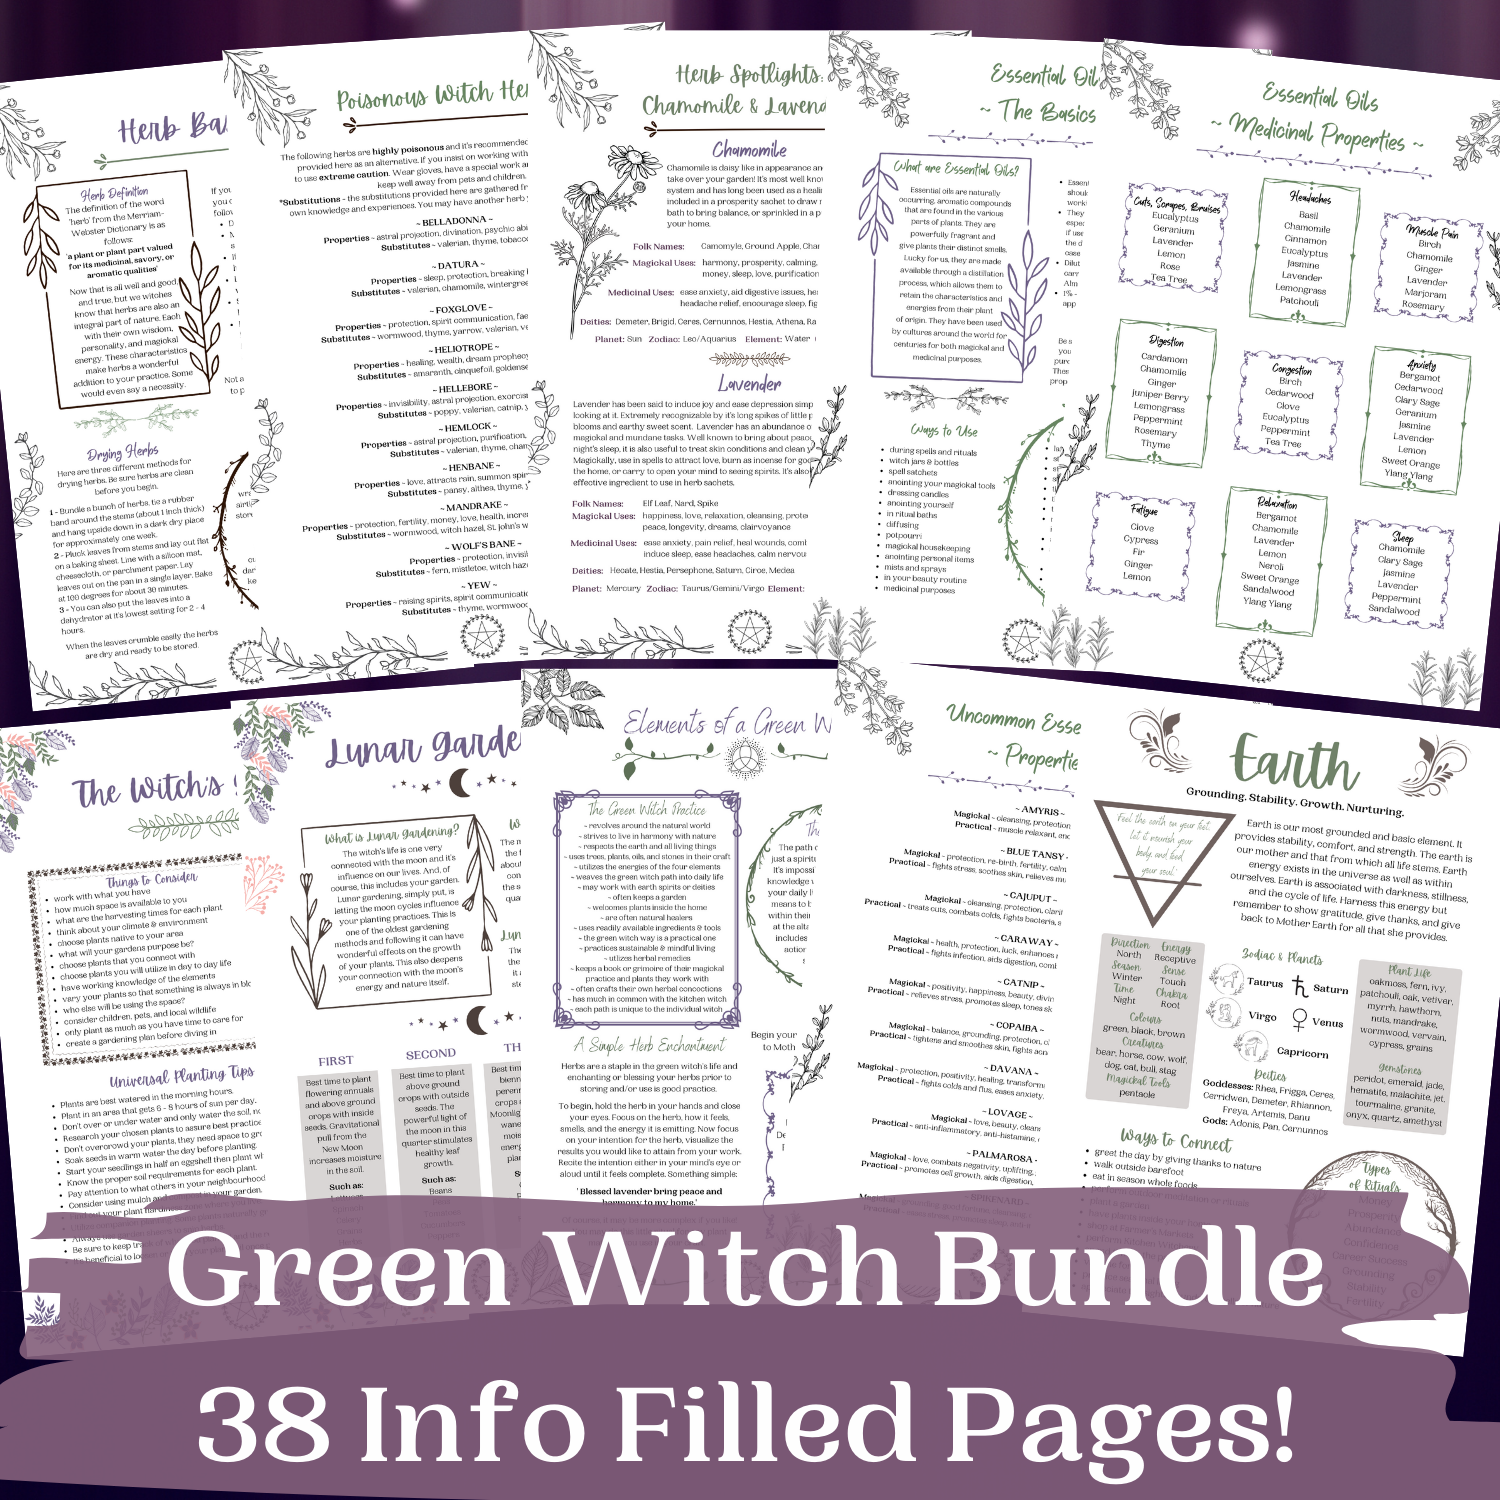 Green Witchcraft and Magical Herbalism: White, Green, and Natural